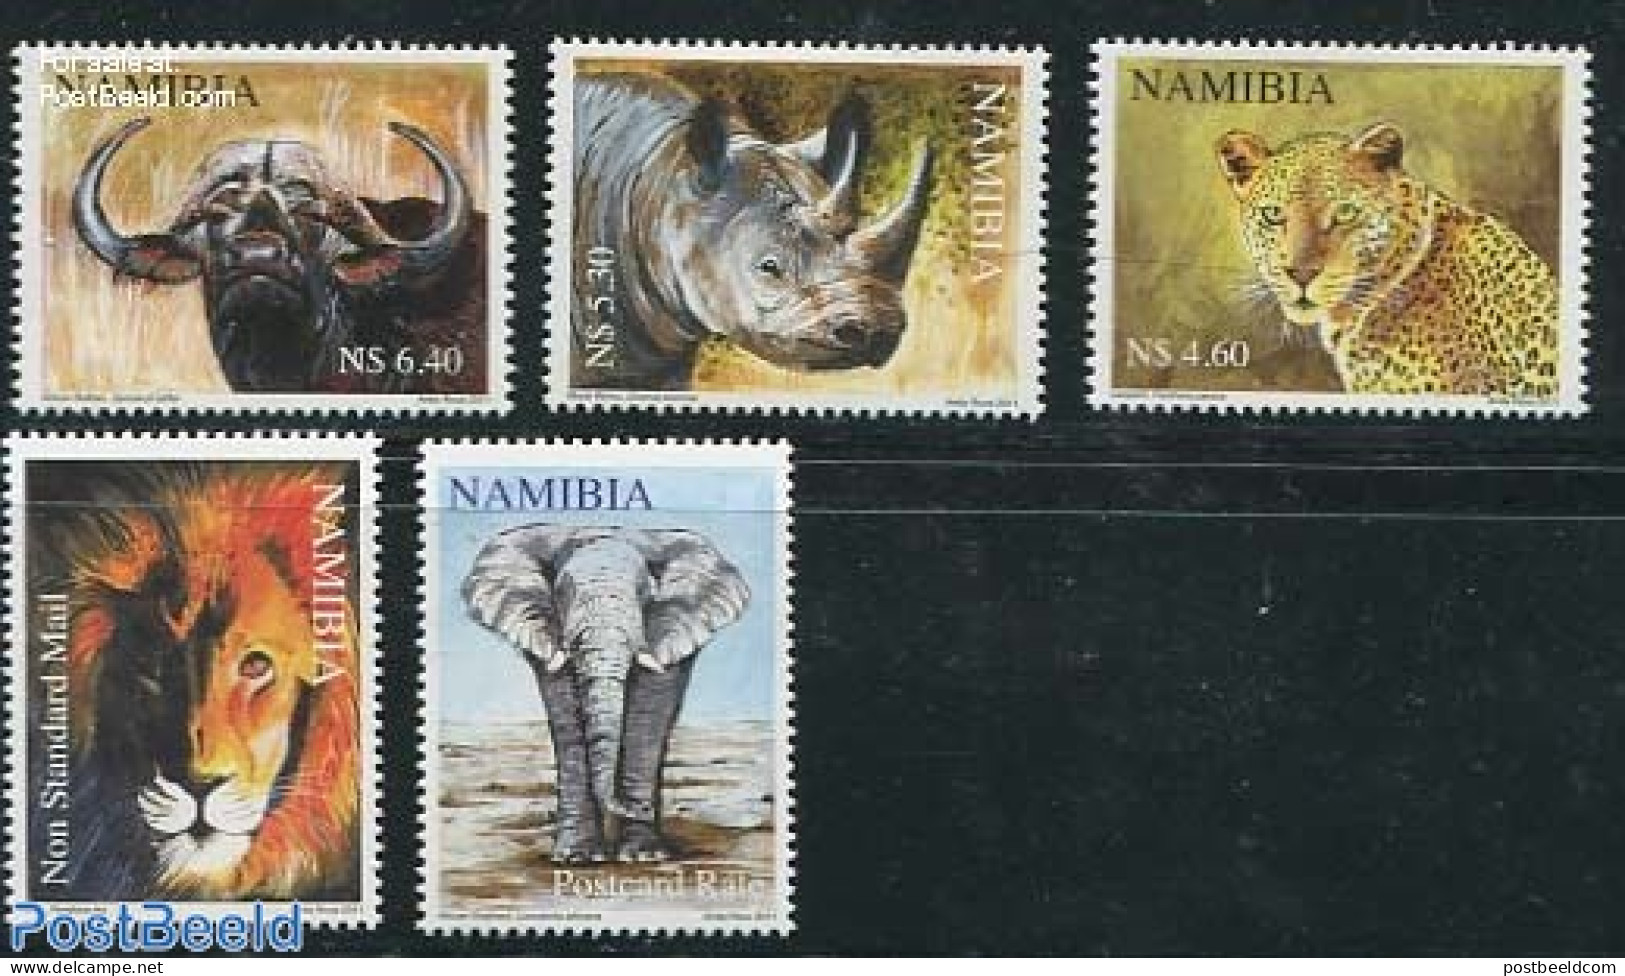 Namibia 2011 The Big Five 5v, Mint NH, Nature - Animals (others & Mixed) - Cat Family - Elephants - Rhinoceros - Namibie (1990- ...)